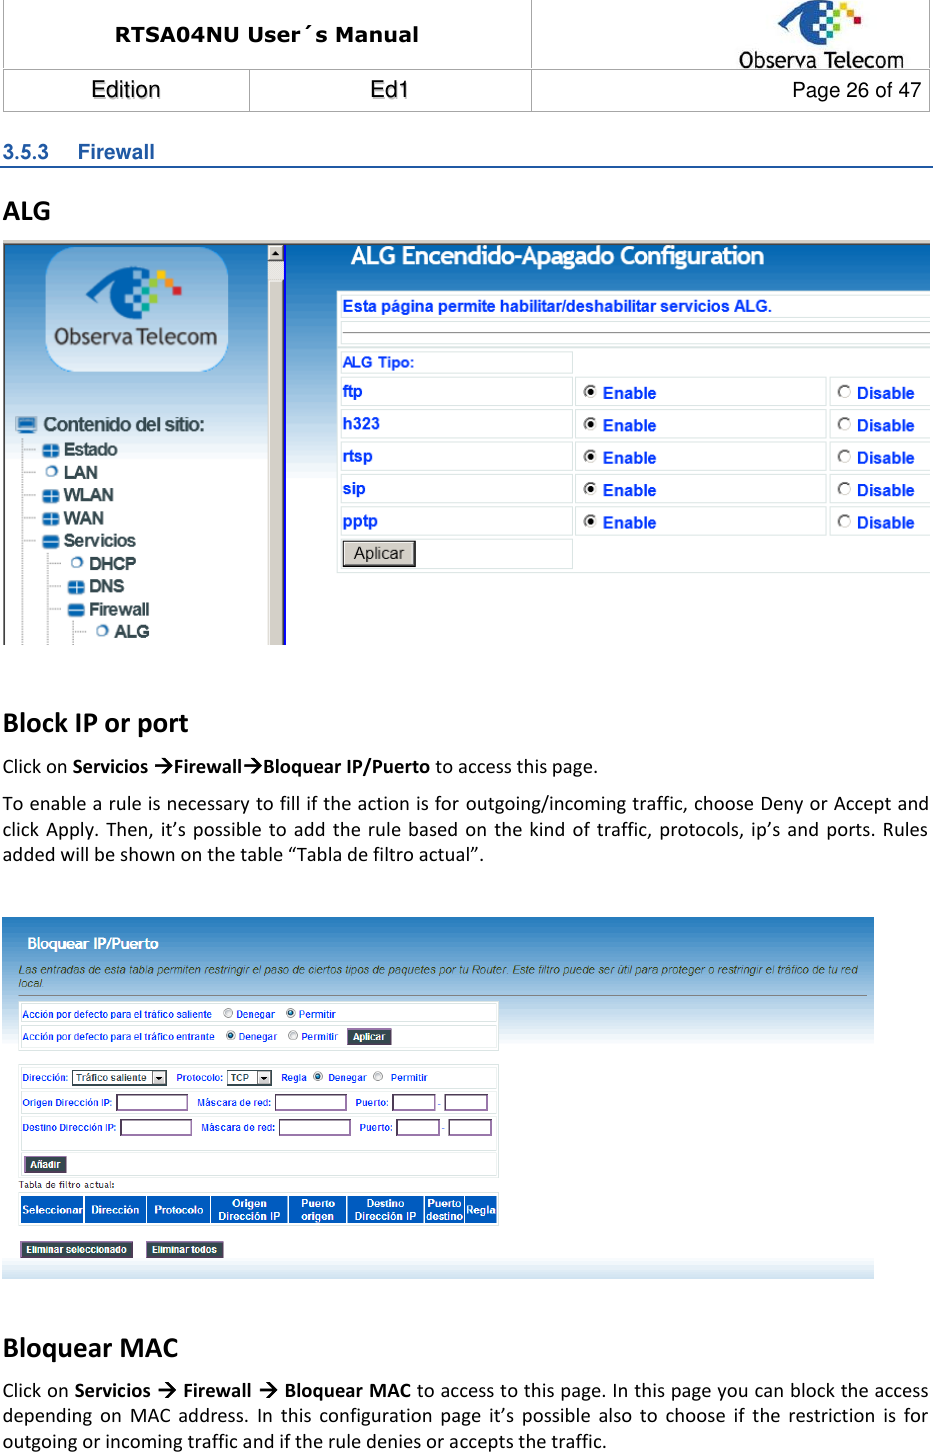 RTSA04NU User´s Manual  EEddiittiioonn  EEdd11  Page 26 of 47  3.5.3  Firewall ALG   Block IP or port Click on Servicios FirewallBloquear IP/Puerto to access this page.  To enable a rule is necessary to fill if the action is for outgoing/incoming traffic, choose Deny or Accept and click Apply. Then,  it’s possible to add the rule  based on  the  kind of traffic,  protocols, ip’s and ports. Rules added will be shown on the table “Tabla de filtro actual”.    Bloquear MAC Click on Servicios  Firewall  Bloquear MAC to access to this page. In this page you can block the access depending  on  MAC  address.  In  this  configuration  page  it’s  possible  also  to  choose  if  the  restriction  is  for outgoing or incoming traffic and if the rule denies or accepts the traffic.  